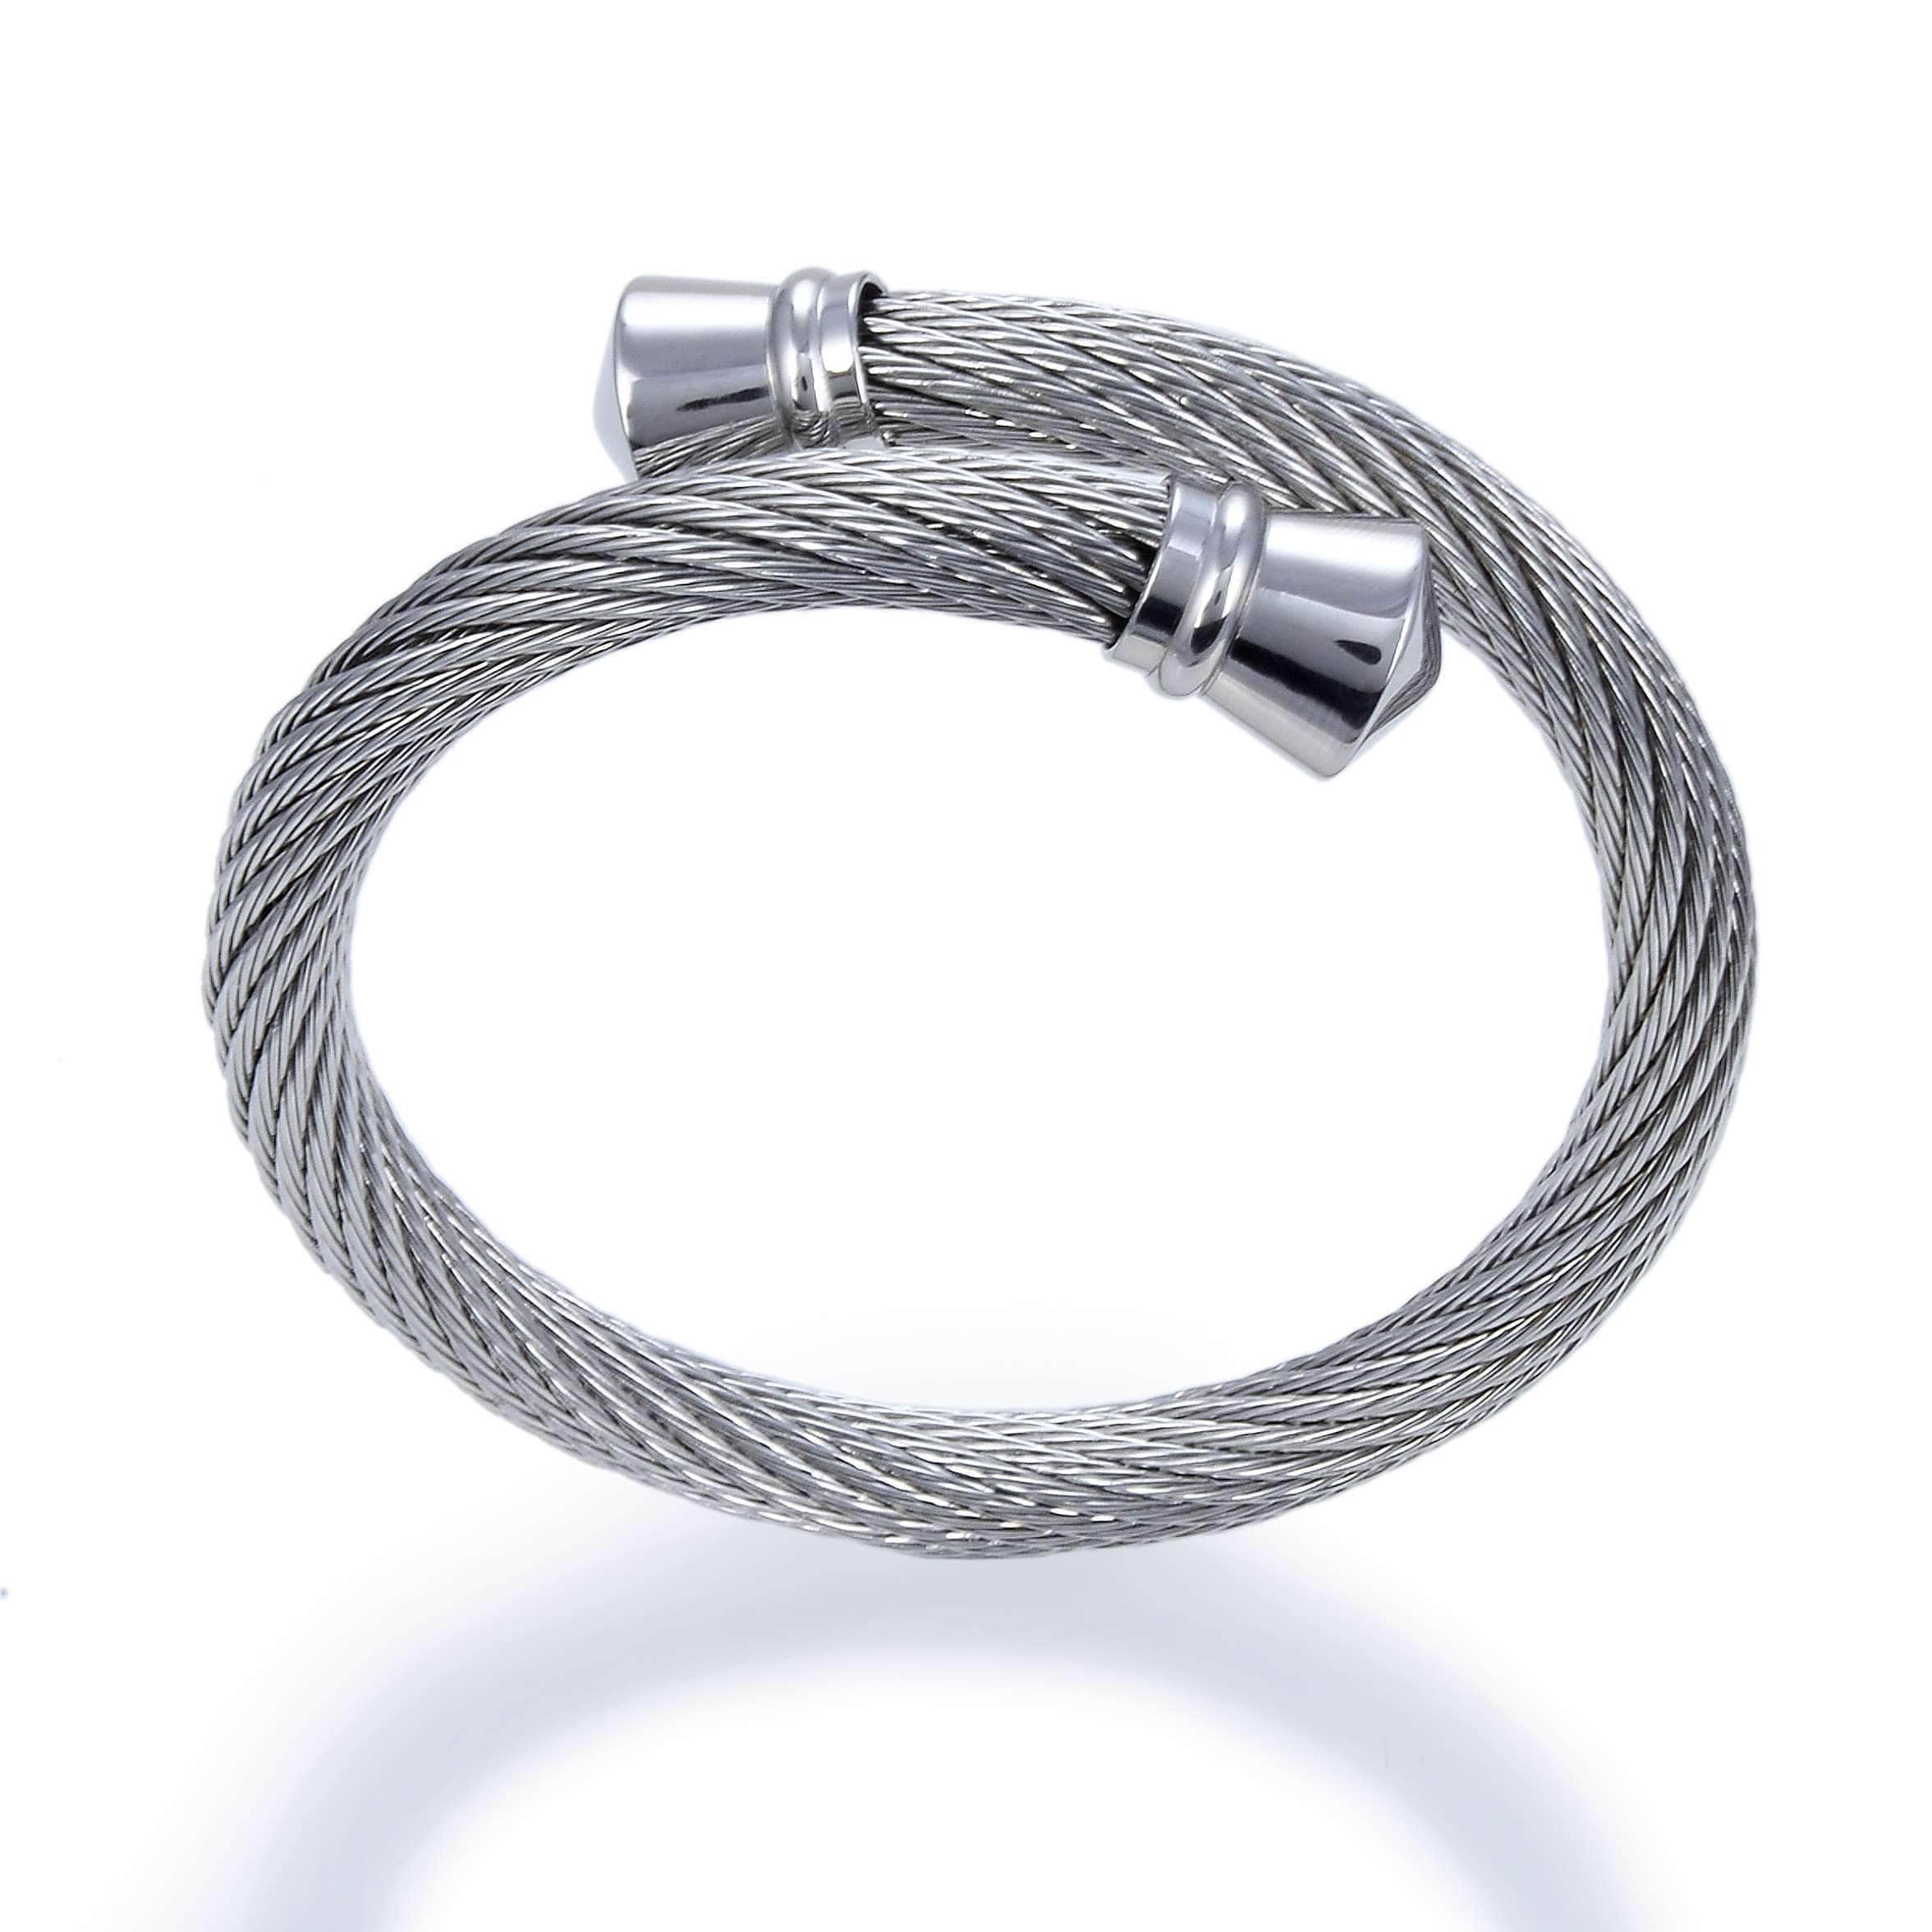 Kalifano Steel Hearts Jewelry Steel Hearts Rope Chain Pointed Tip Open Bangle Bracelet SHB200-49